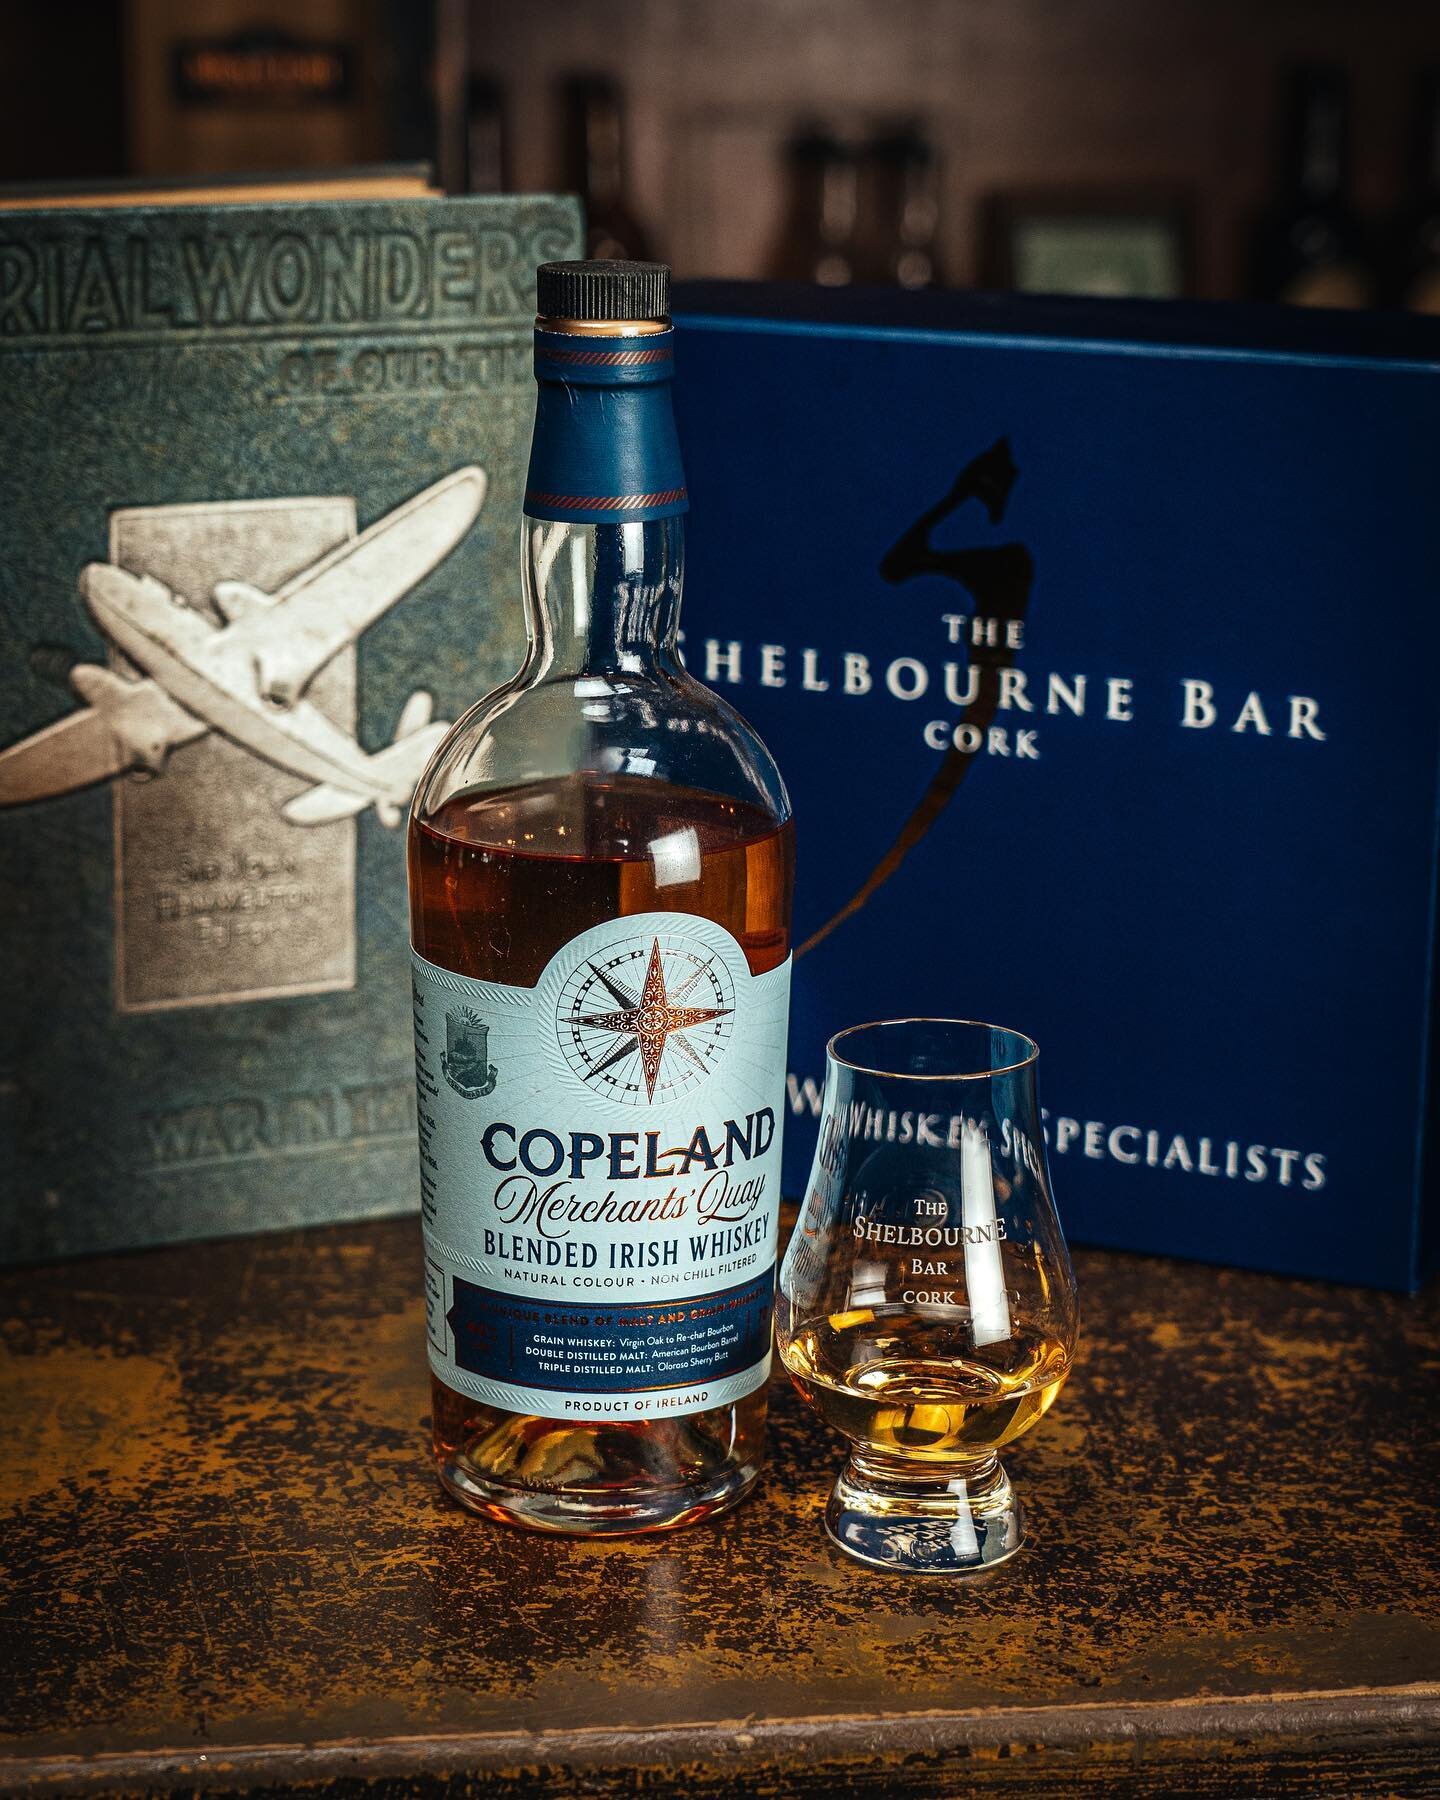 A smooth, rich Irish whiskey made from a unique blend of three whiskeys &ndash; grain whiskey, double distilled, and triple distilled malts.

The Copeland Merchants Quay is our new Whiskey of the Week 🥃

Pop in the Shelbourne Bar and try it, only th